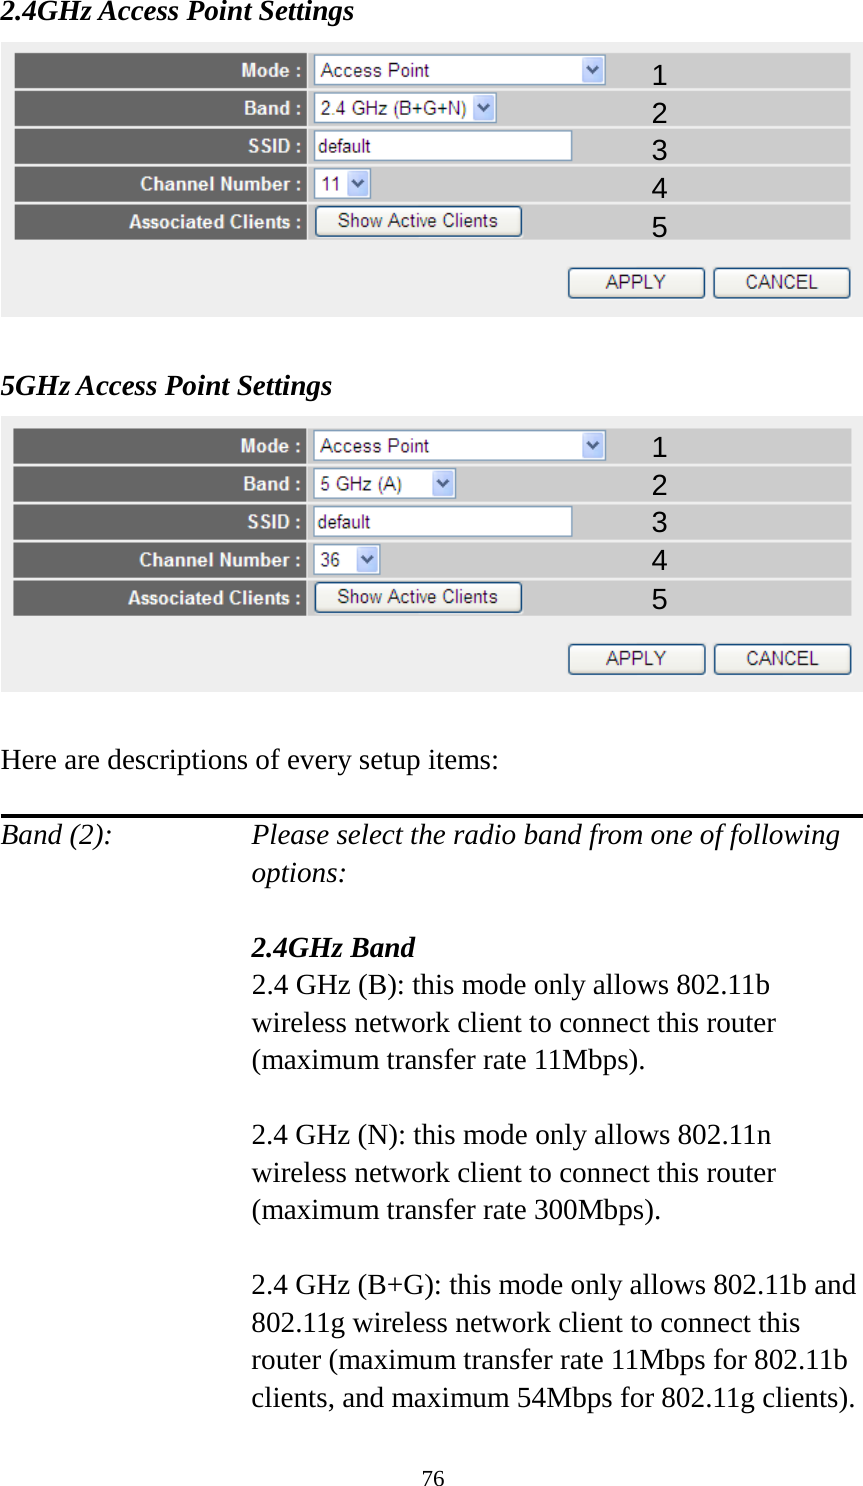 76 2.4GHz Access Point Settings   5GHz Access Point Settings   Here are descriptions of every setup items:  Band (2):   Please select the radio band from one of following options:     2.4GHz Band 2.4 GHz (B): this mode only allows 802.11b wireless network client to connect this router (maximum transfer rate 11Mbps).  2.4 GHz (N): this mode only allows 802.11n wireless network client to connect this router (maximum transfer rate 300Mbps).  2.4 GHz (B+G): this mode only allows 802.11b and 802.11g wireless network client to connect this router (maximum transfer rate 11Mbps for 802.11b clients, and maximum 54Mbps for 802.11g clients). 1 2 3 4 5 1 2 3 4 5 